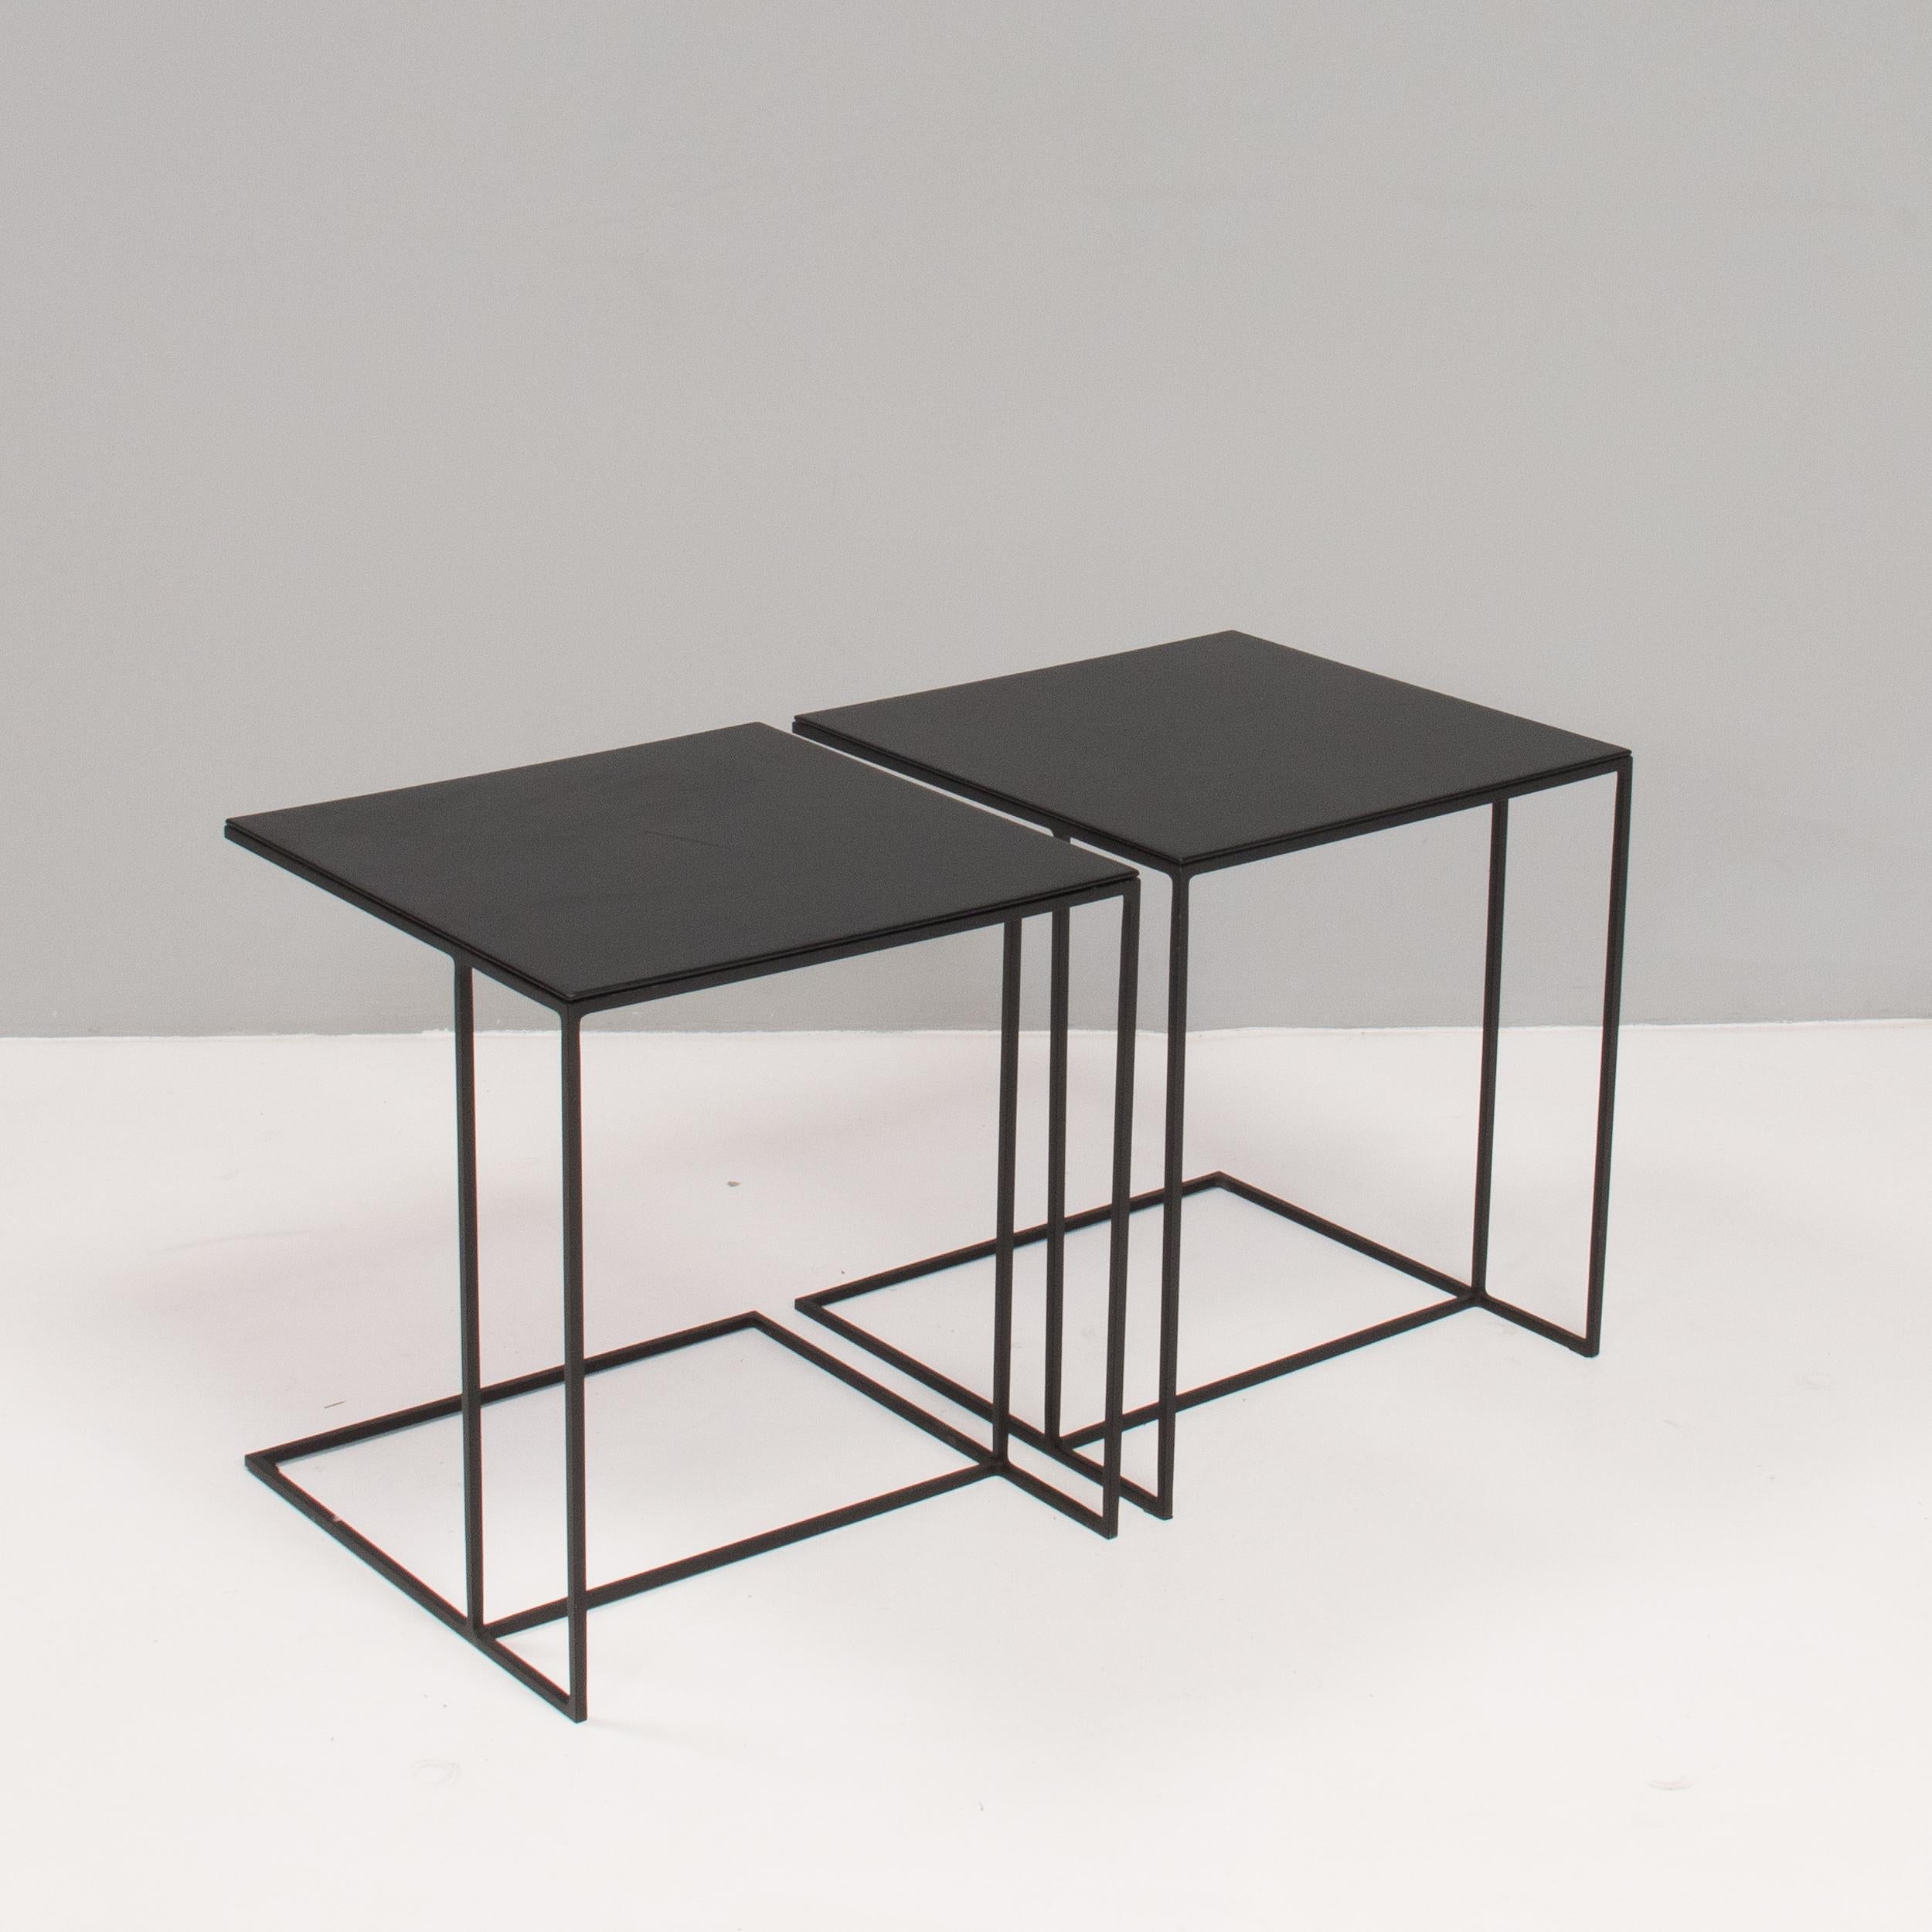 Designed by Rodolfo Dordoni for Minotti, the Ledger side table formed part of the 1998 Collection which celebrated simple, elegant shapes and linear style.

Constructed from a solid iron frame with a matt black powder coating, the side tables have